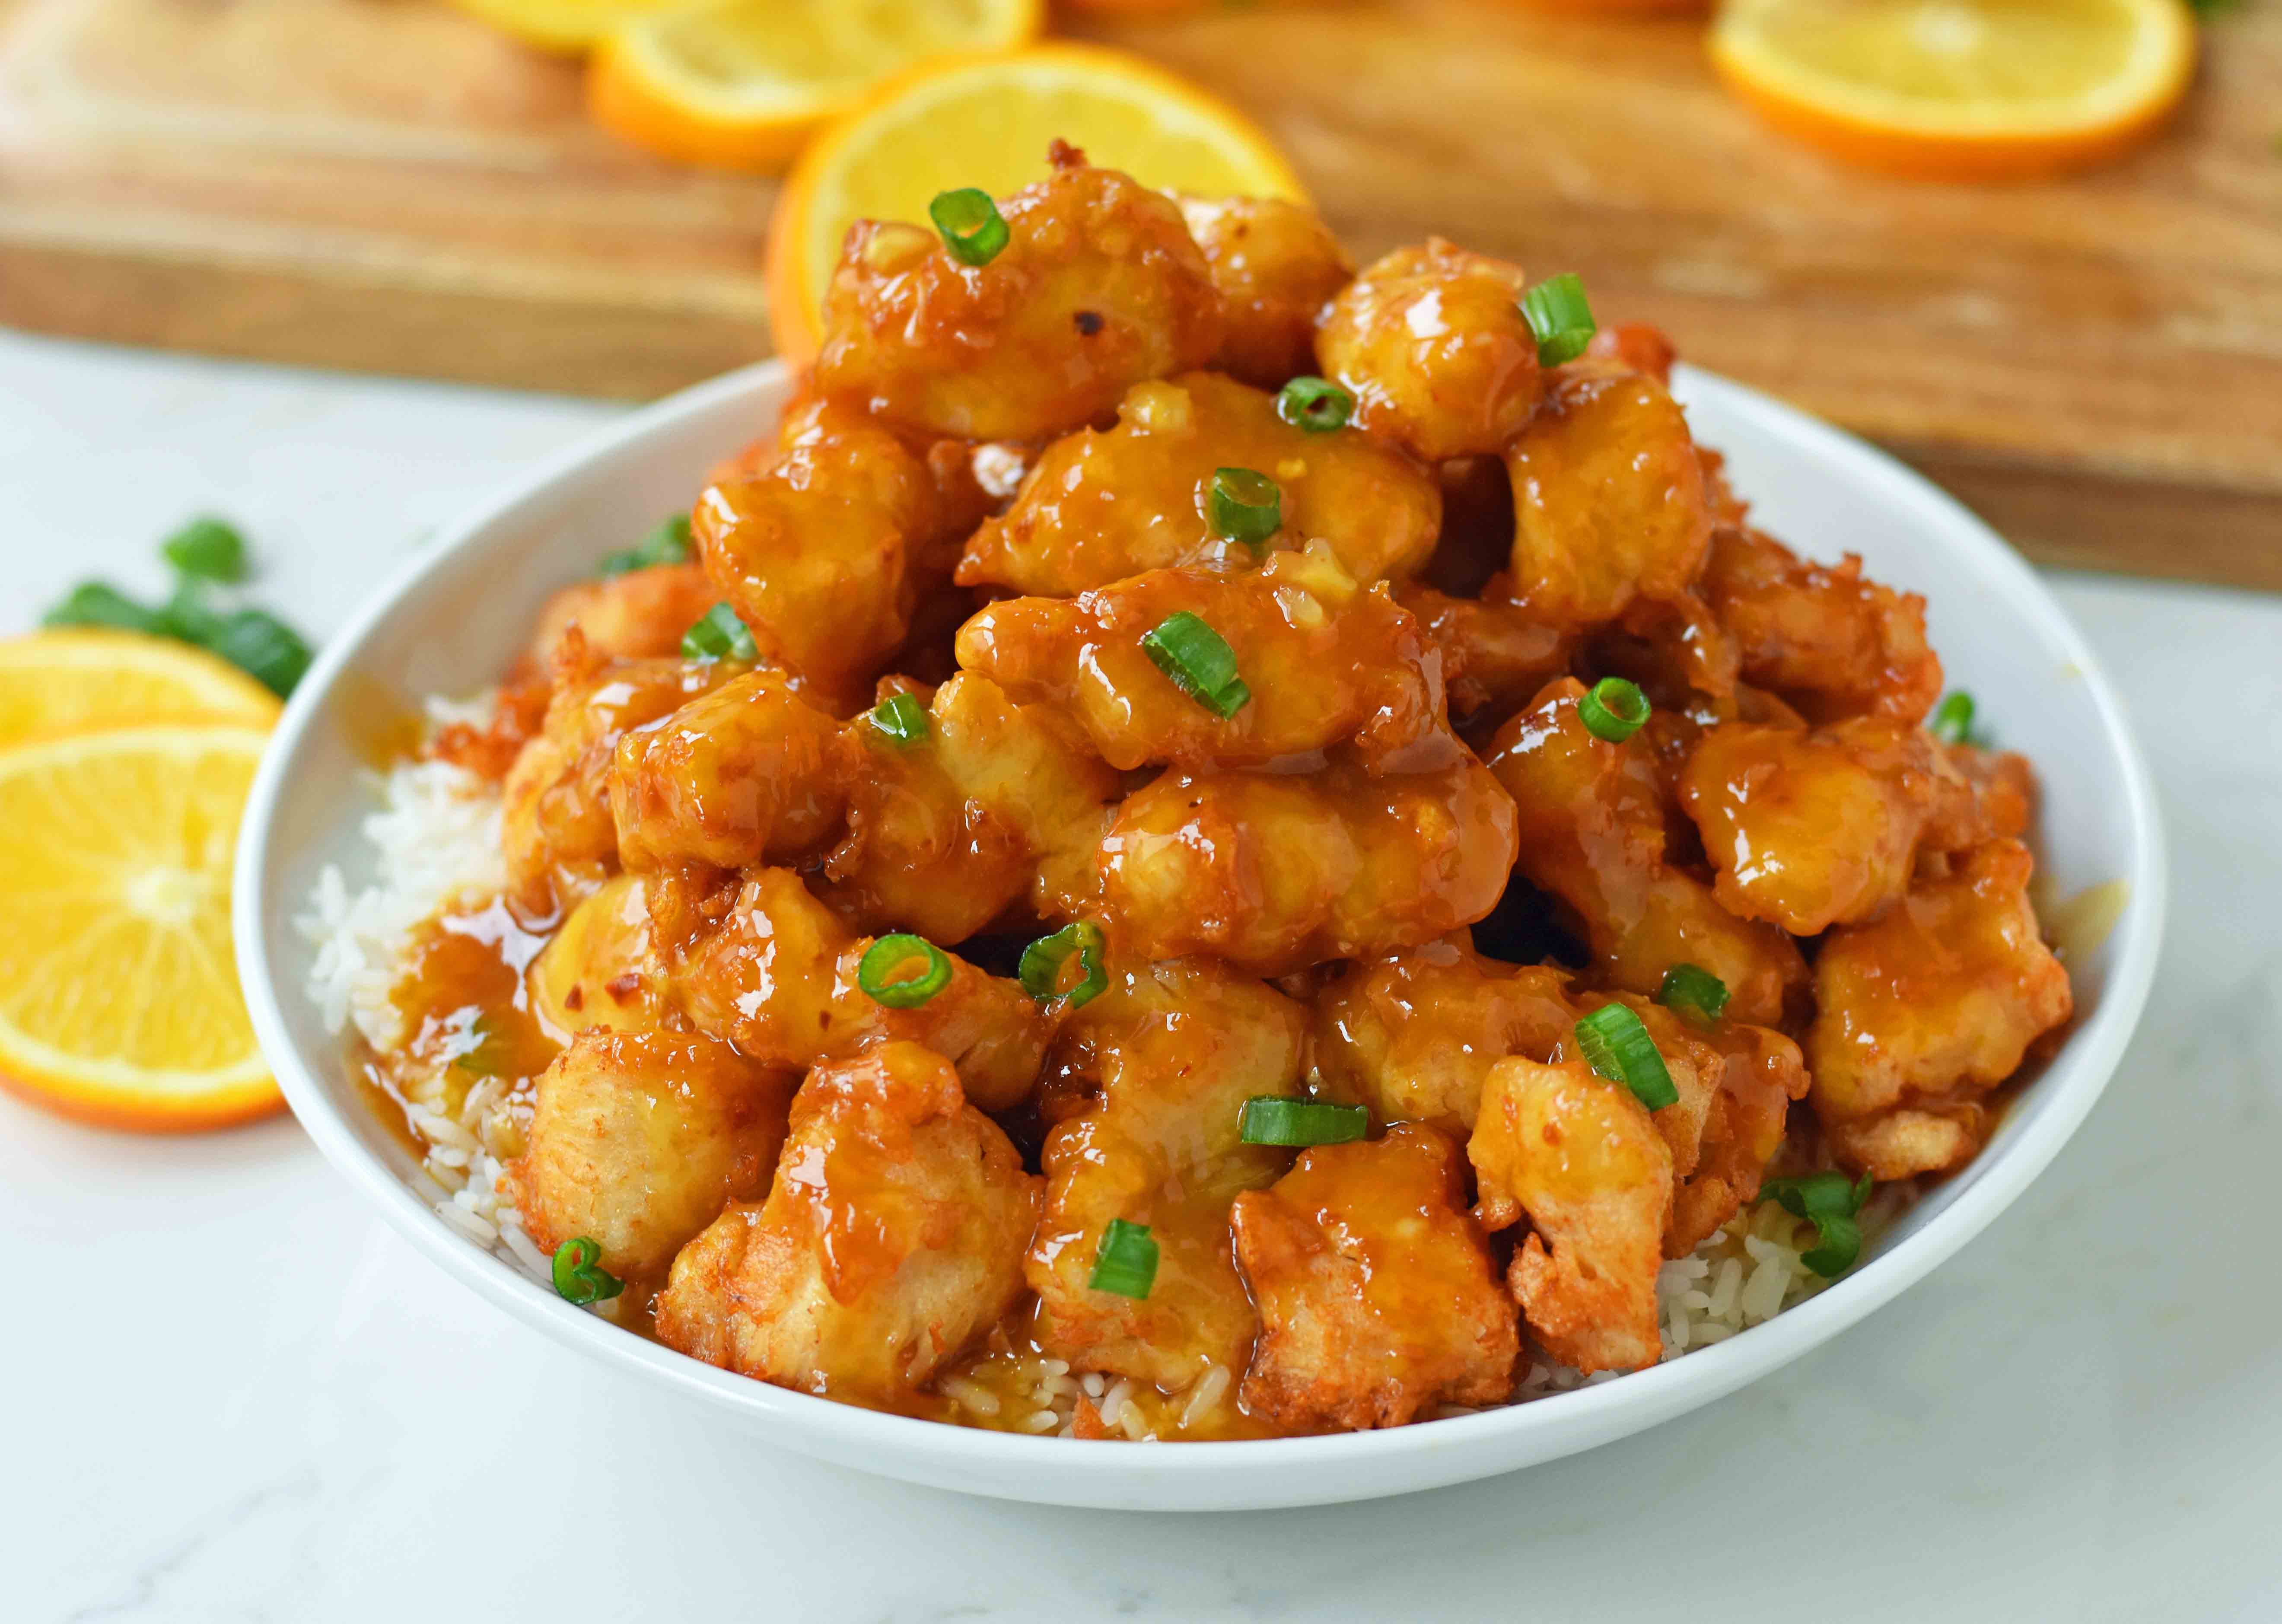 Chinese Orange Chicken that is better than take-out. How to make ORANGE CHICKEN at home with a sweet orange sauce. www.modernhoney.com